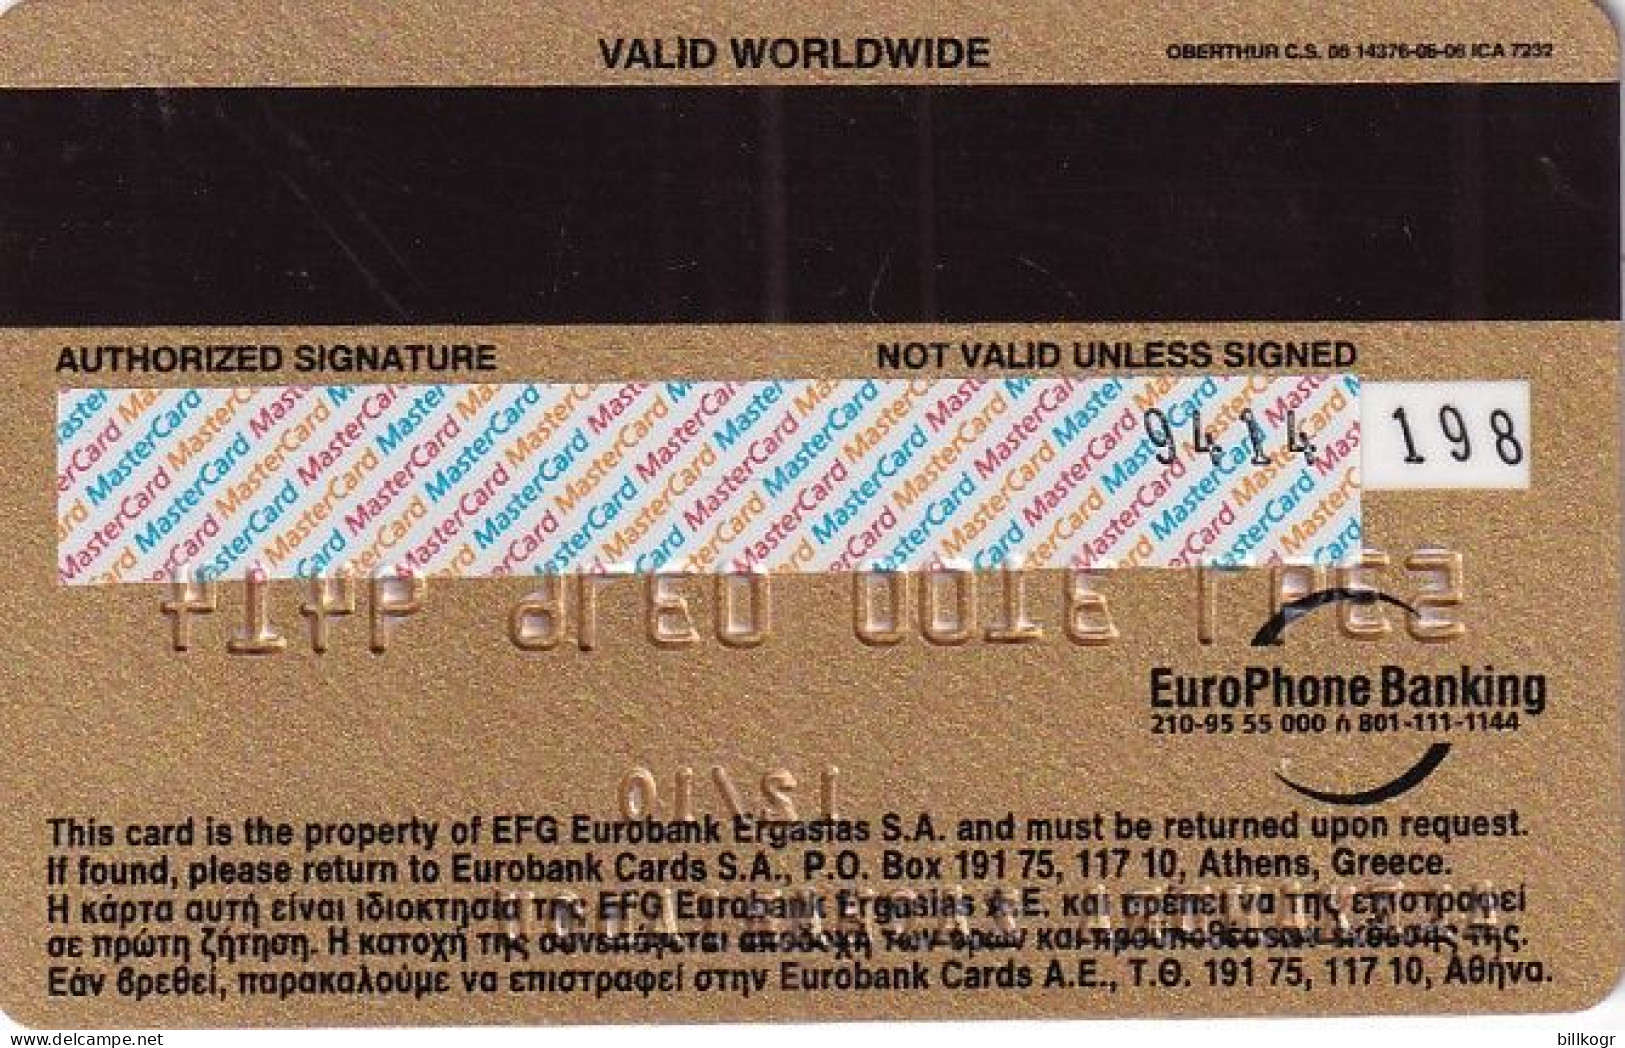 GREECE - Eurobank EFG Gold MasterCard, 06/06, Used - Credit Cards (Exp. Date Min. 10 Years)